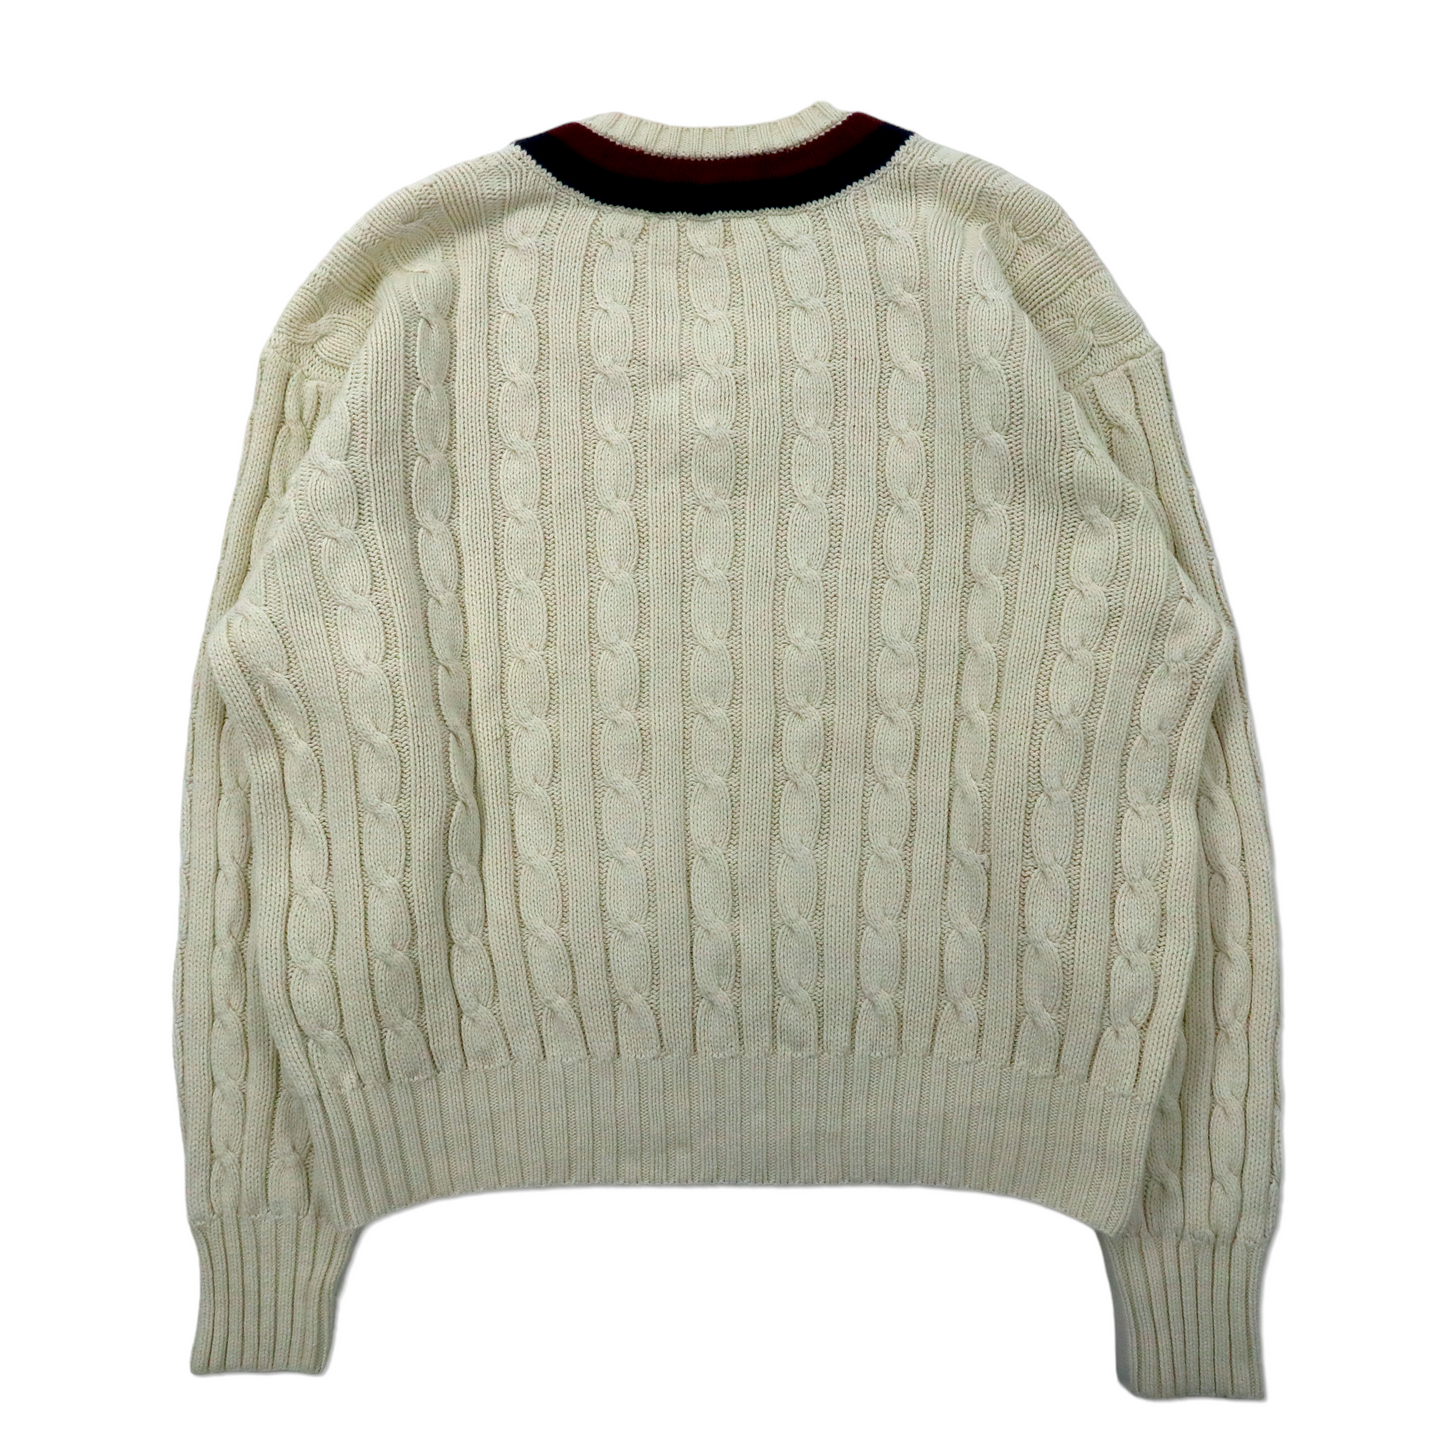 POLO BY RALPH LAUREN V neck knit sweater M White Cotton Hand Knit